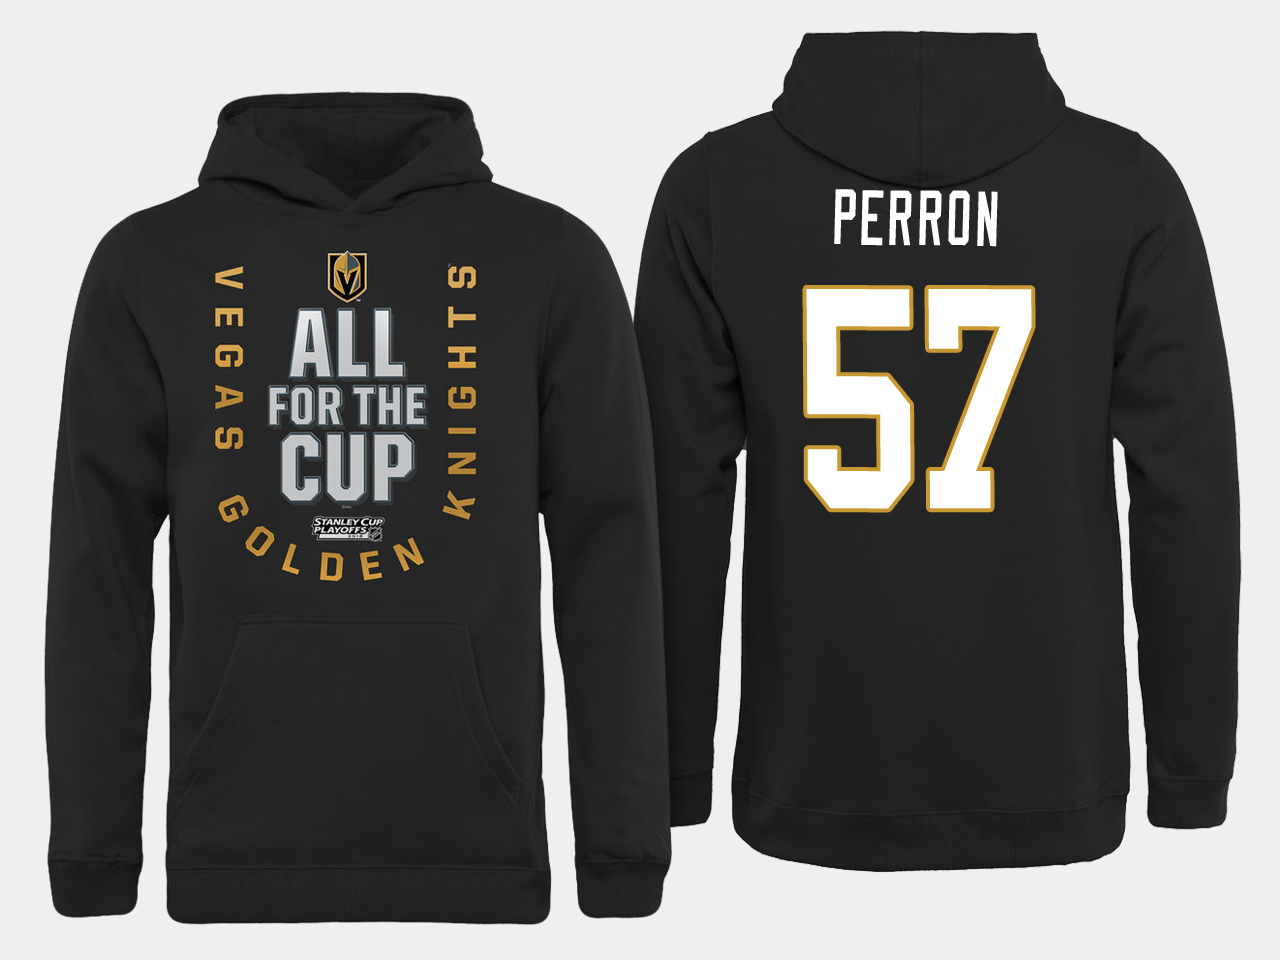 Men NHL Vegas Golden Knights #57 Perron All for the Cup hoodie->more nhl jerseys->NHL Jersey